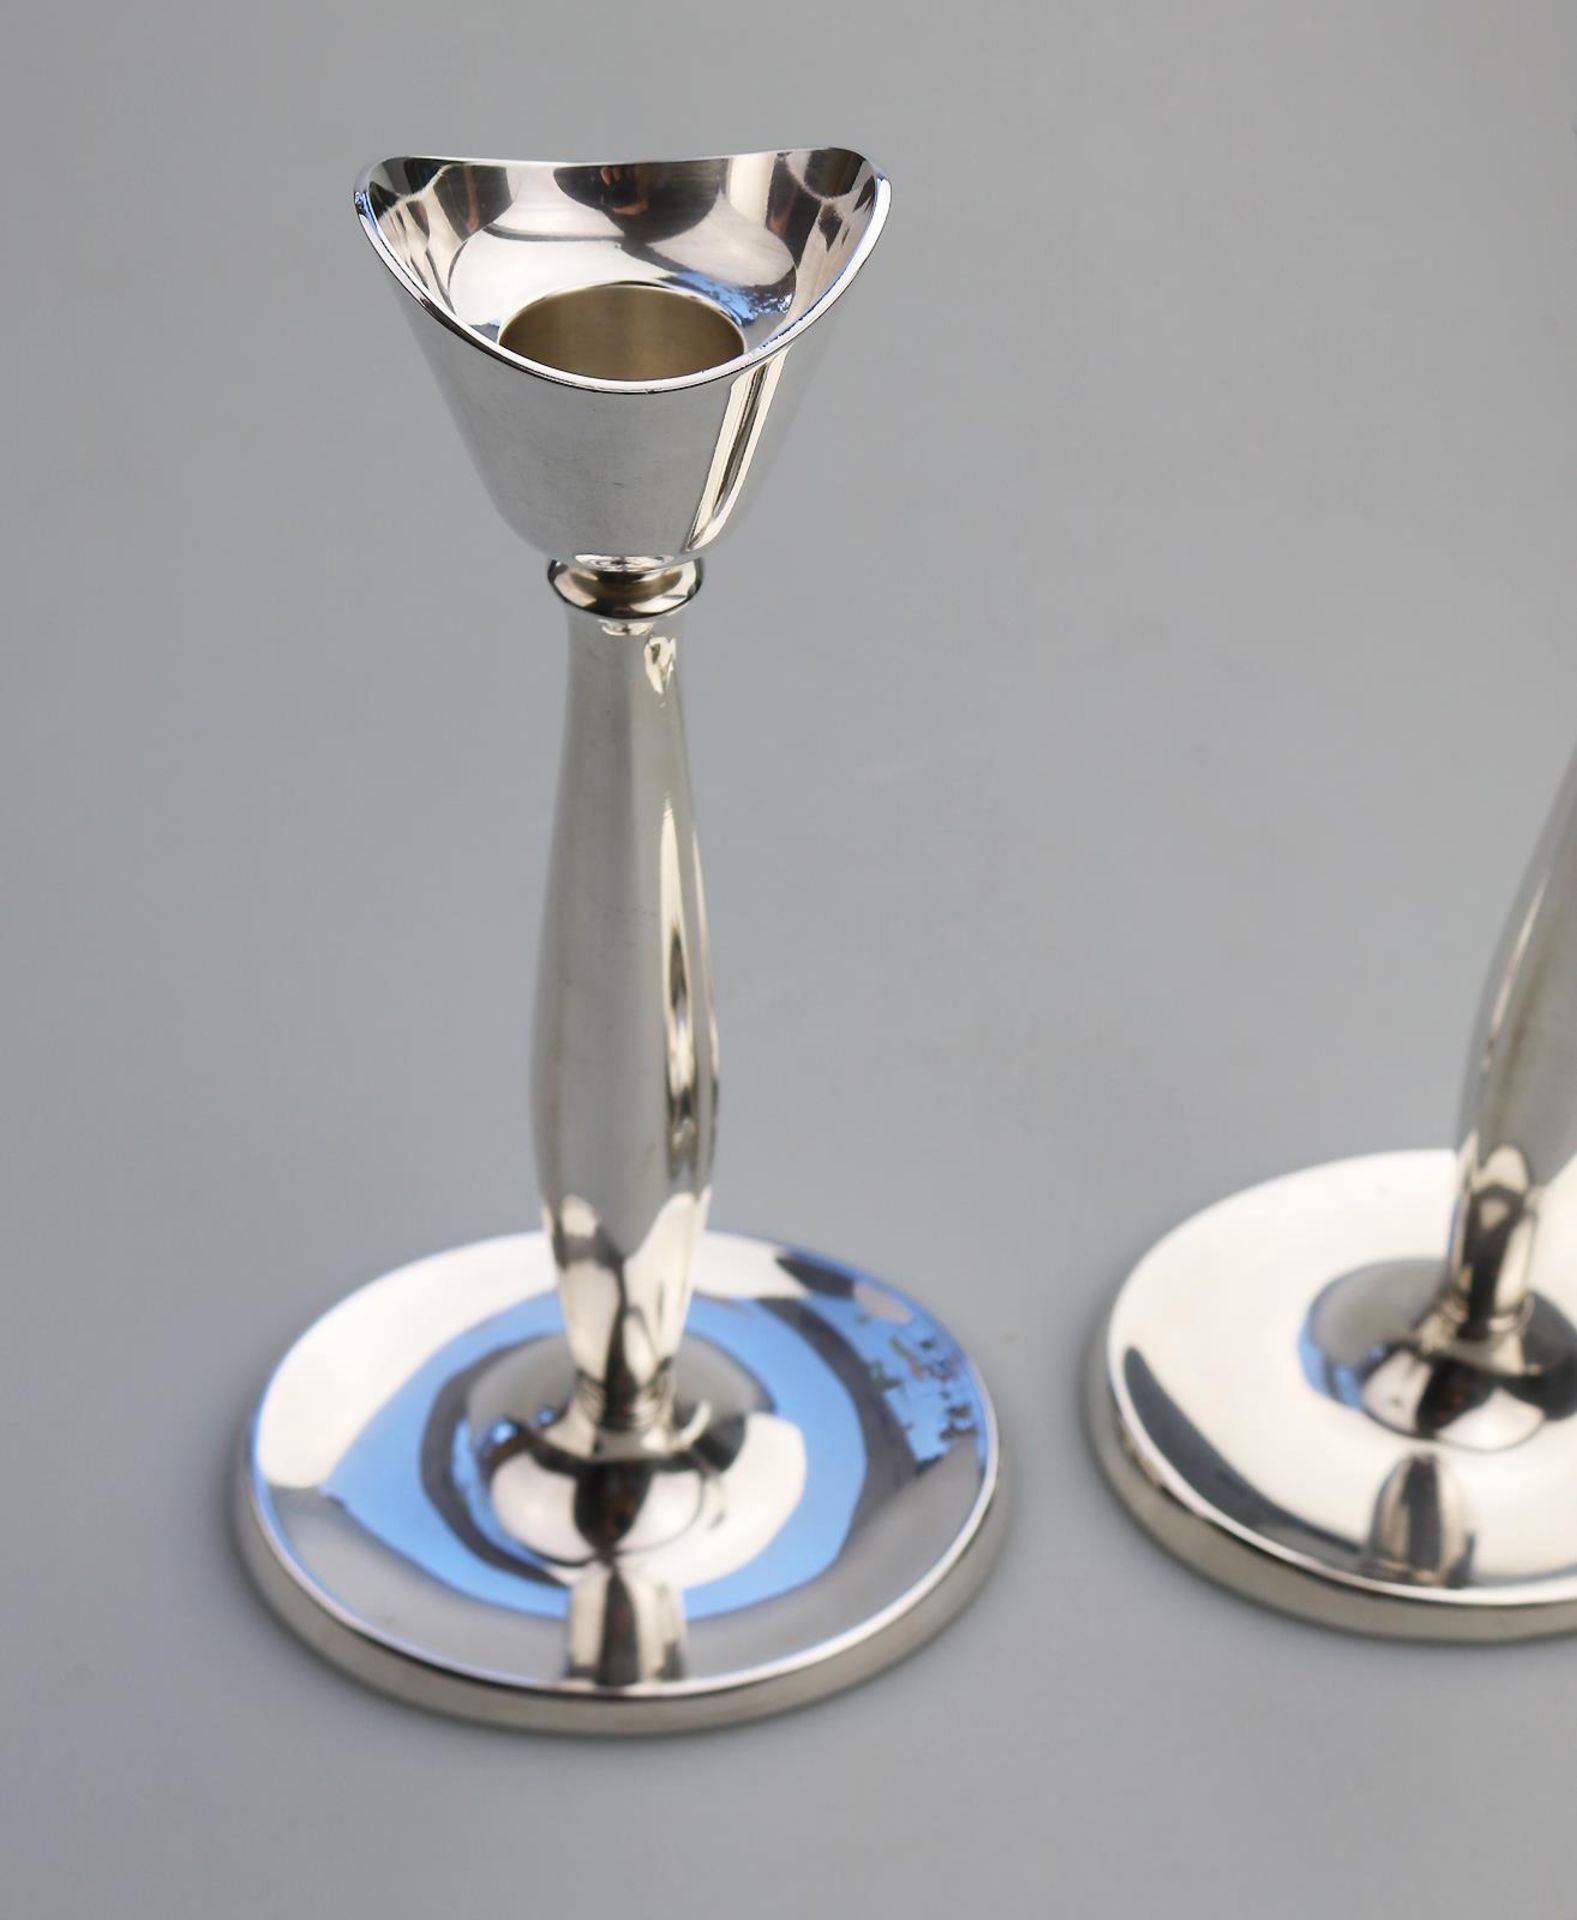 Retro Silver Plate : pair Modernist Candlesticks by Cohr of Denmark C.1950's - Image 3 of 5